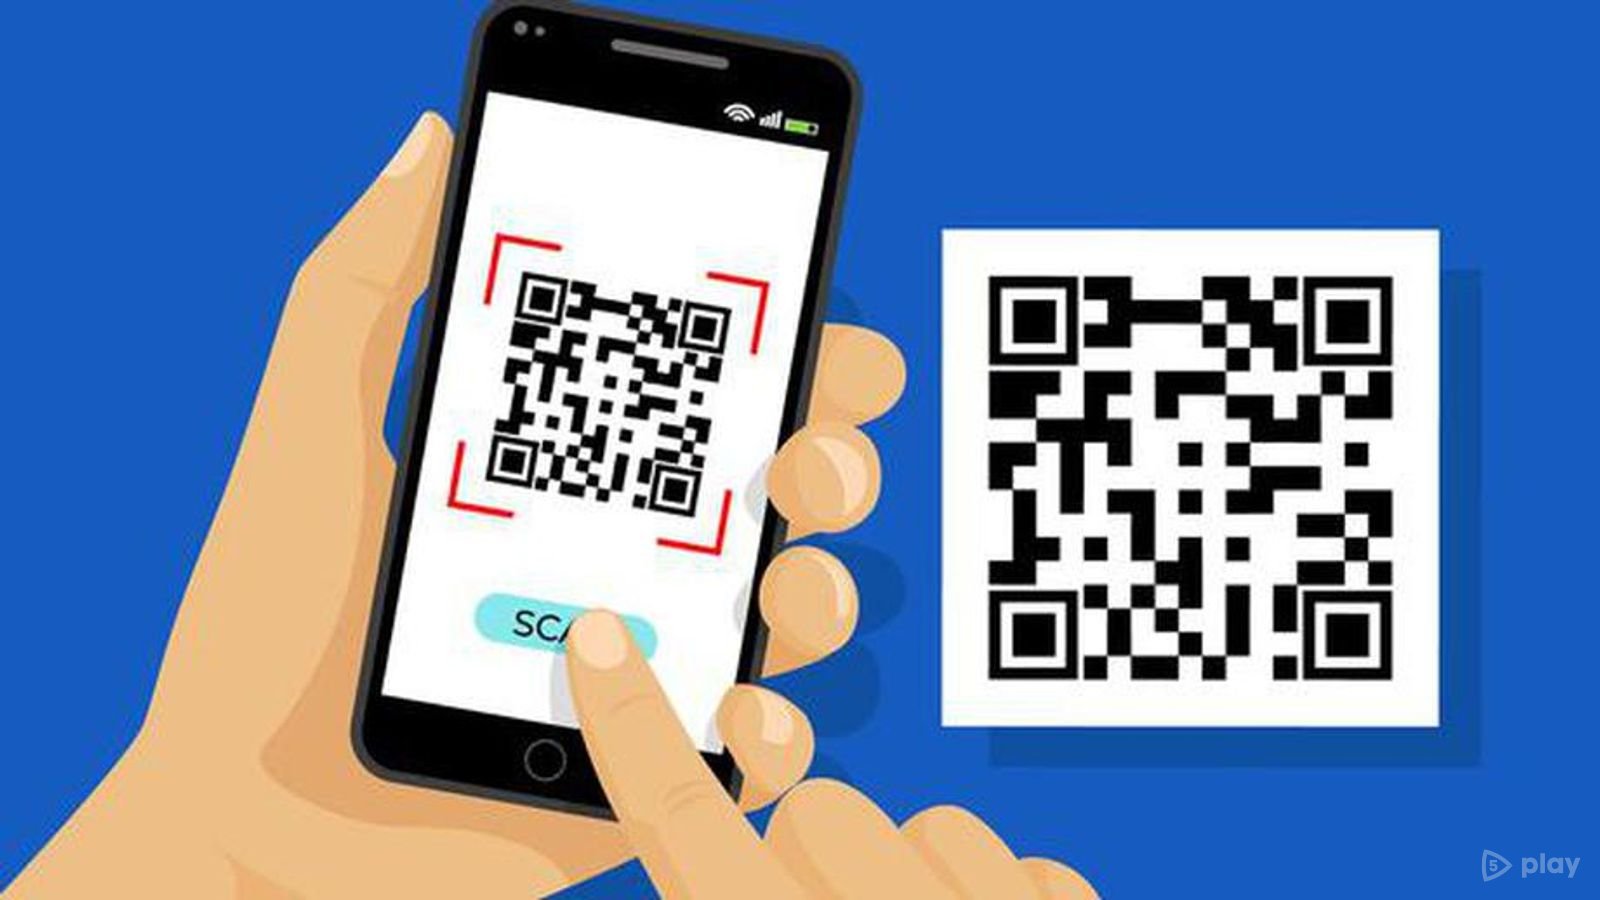 Rumors: a standard QR code scanner will be added to Android 13